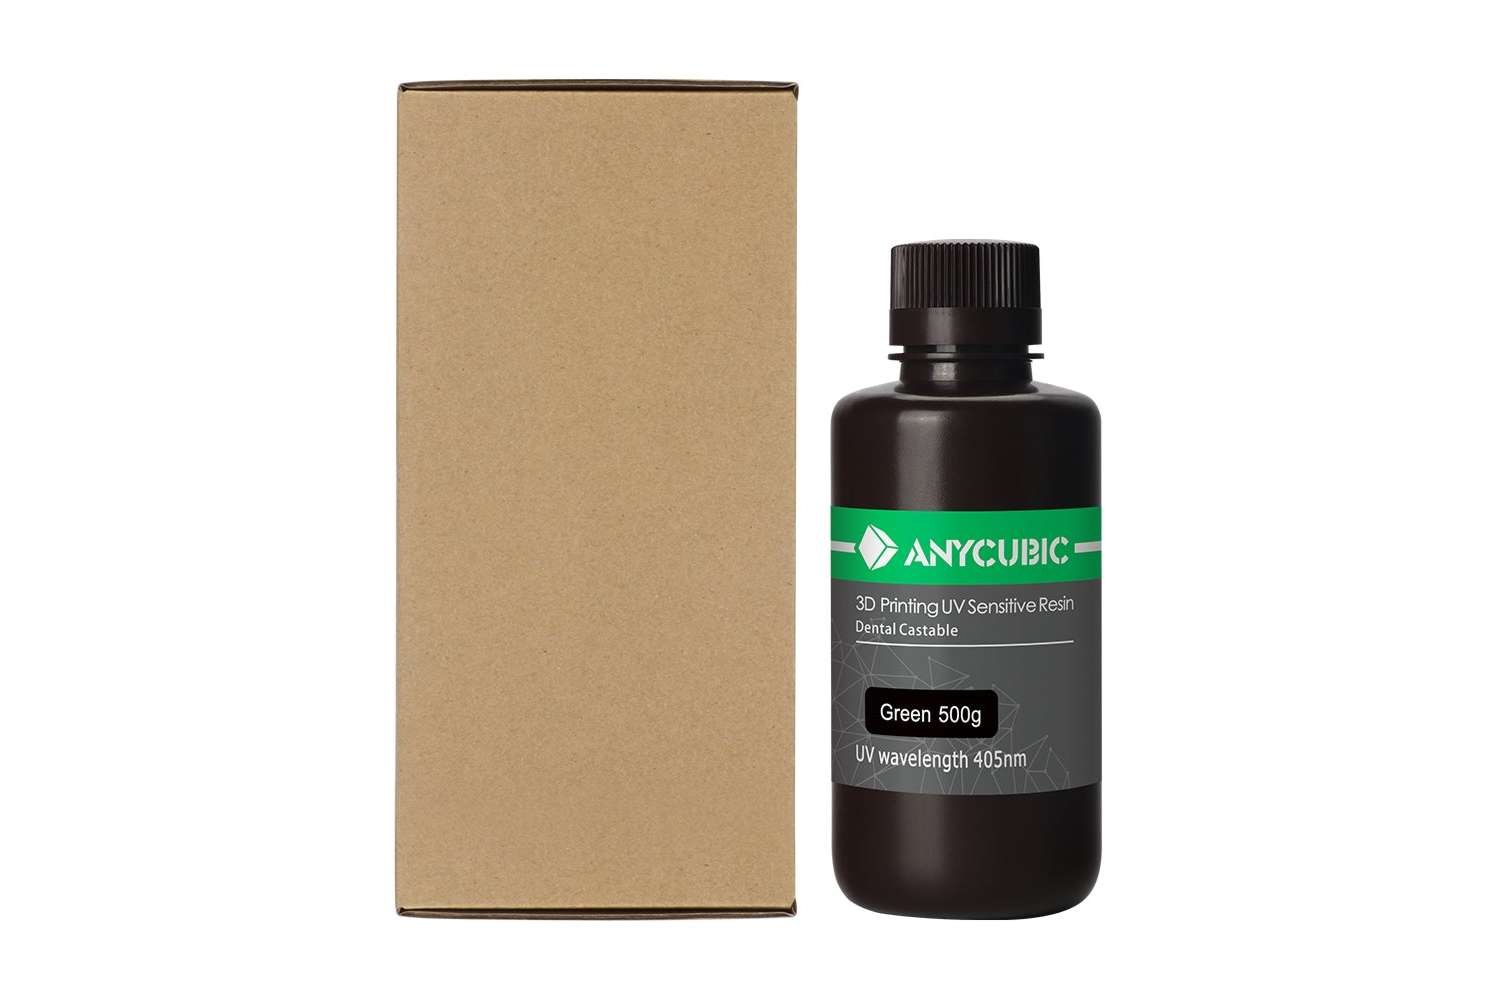 Anycubic-Special-UV-Resin-for-Casting